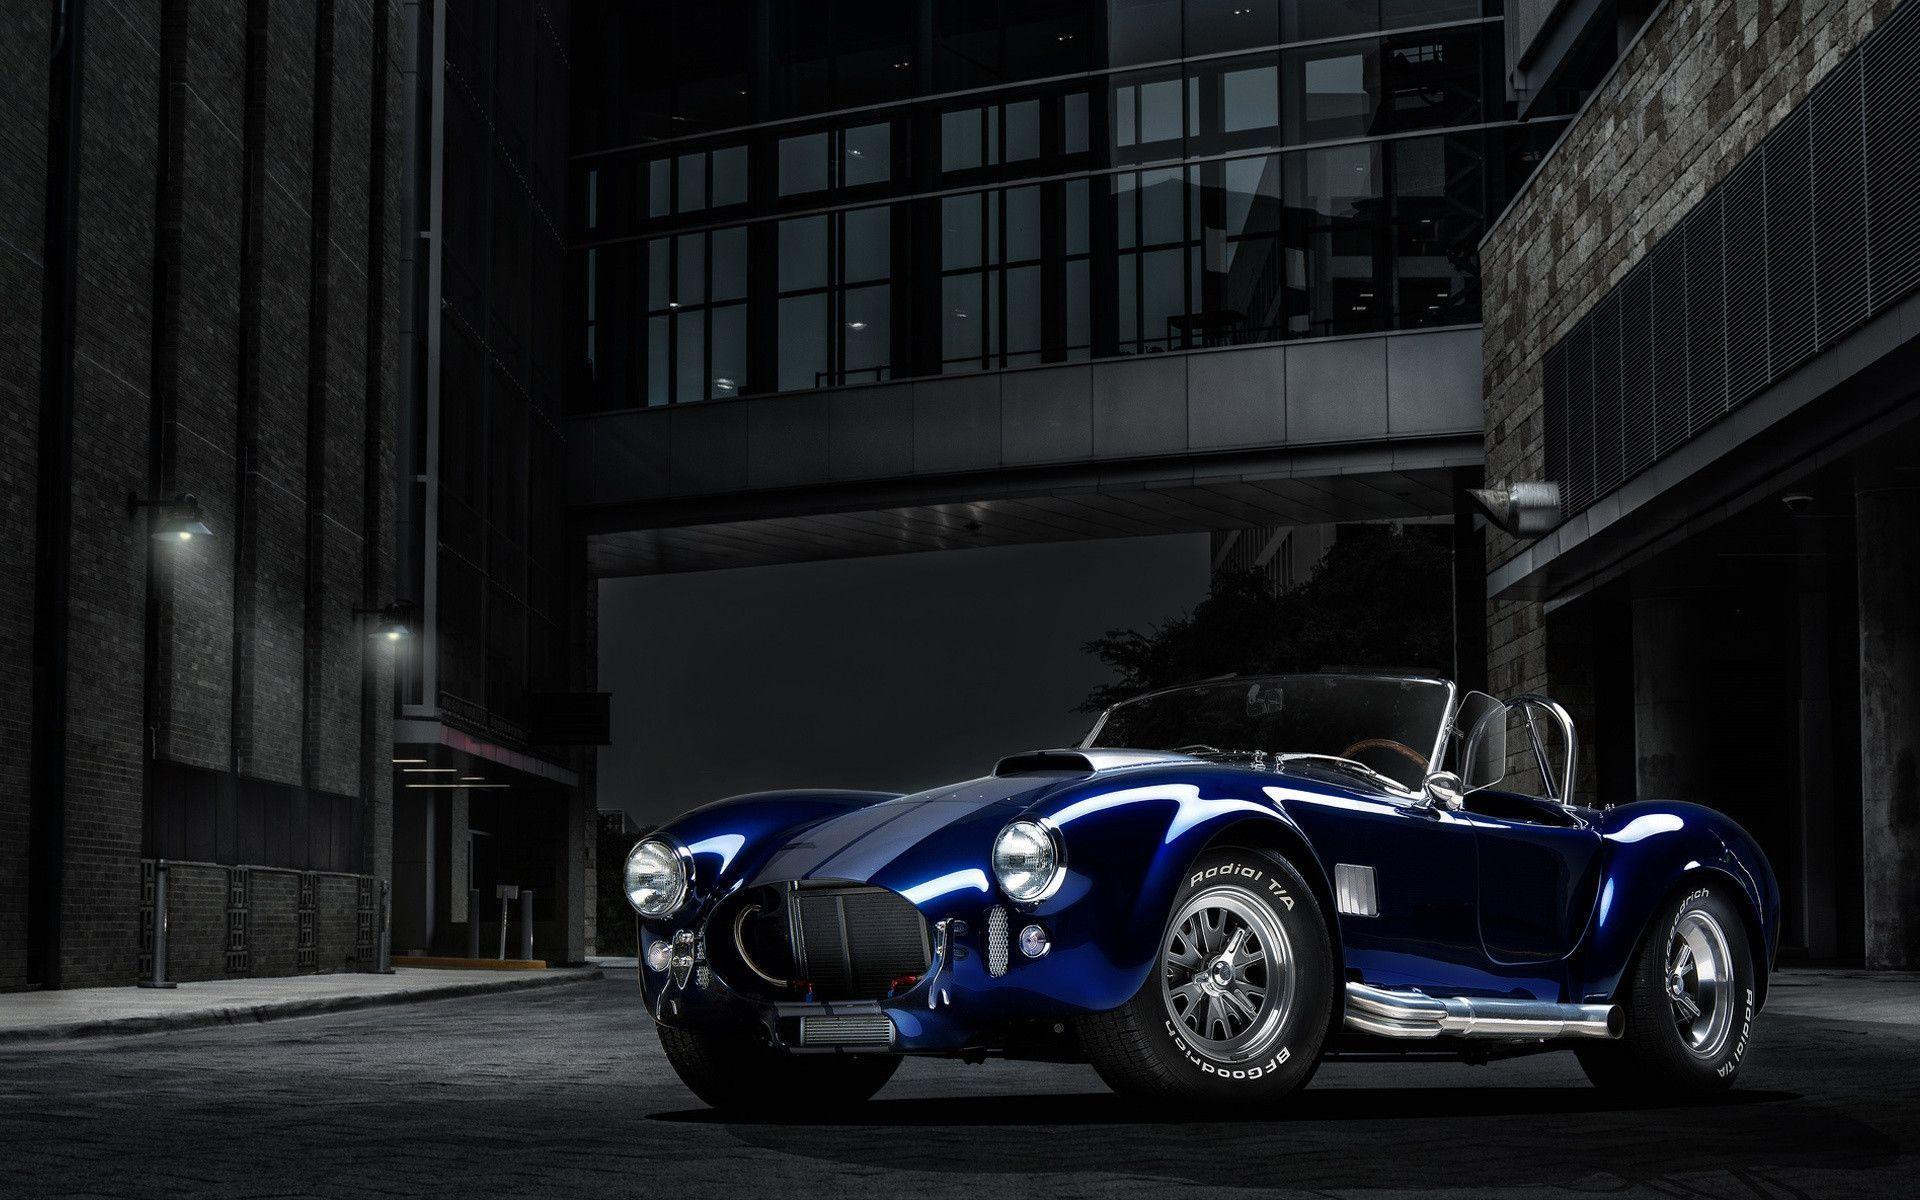 Shelby Cobra Car Wallpapers.